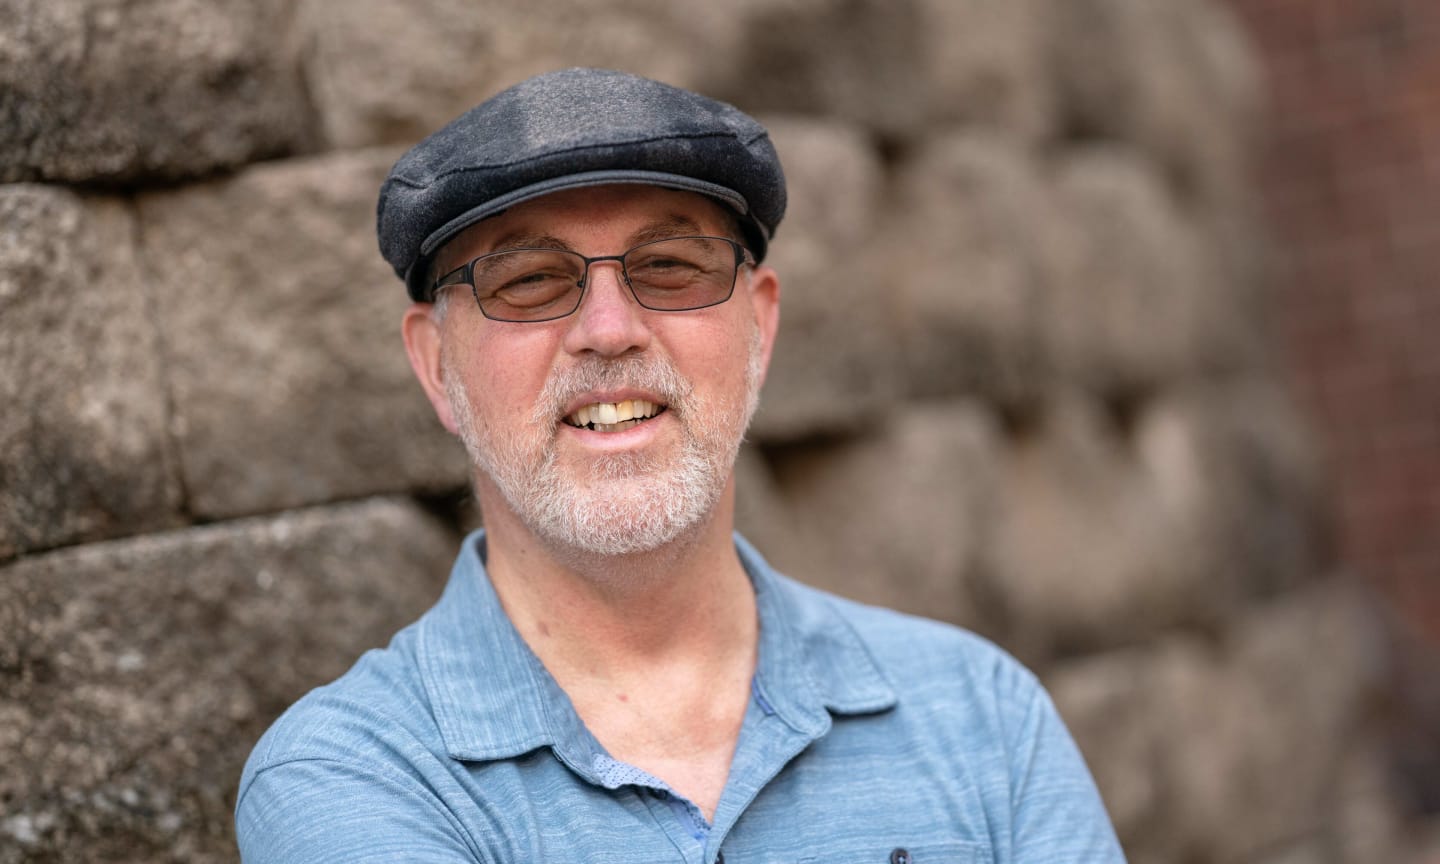 Randy Hatfield, dressed in a blue collared shirt and wearing glasses and a black hat, smiling outside.